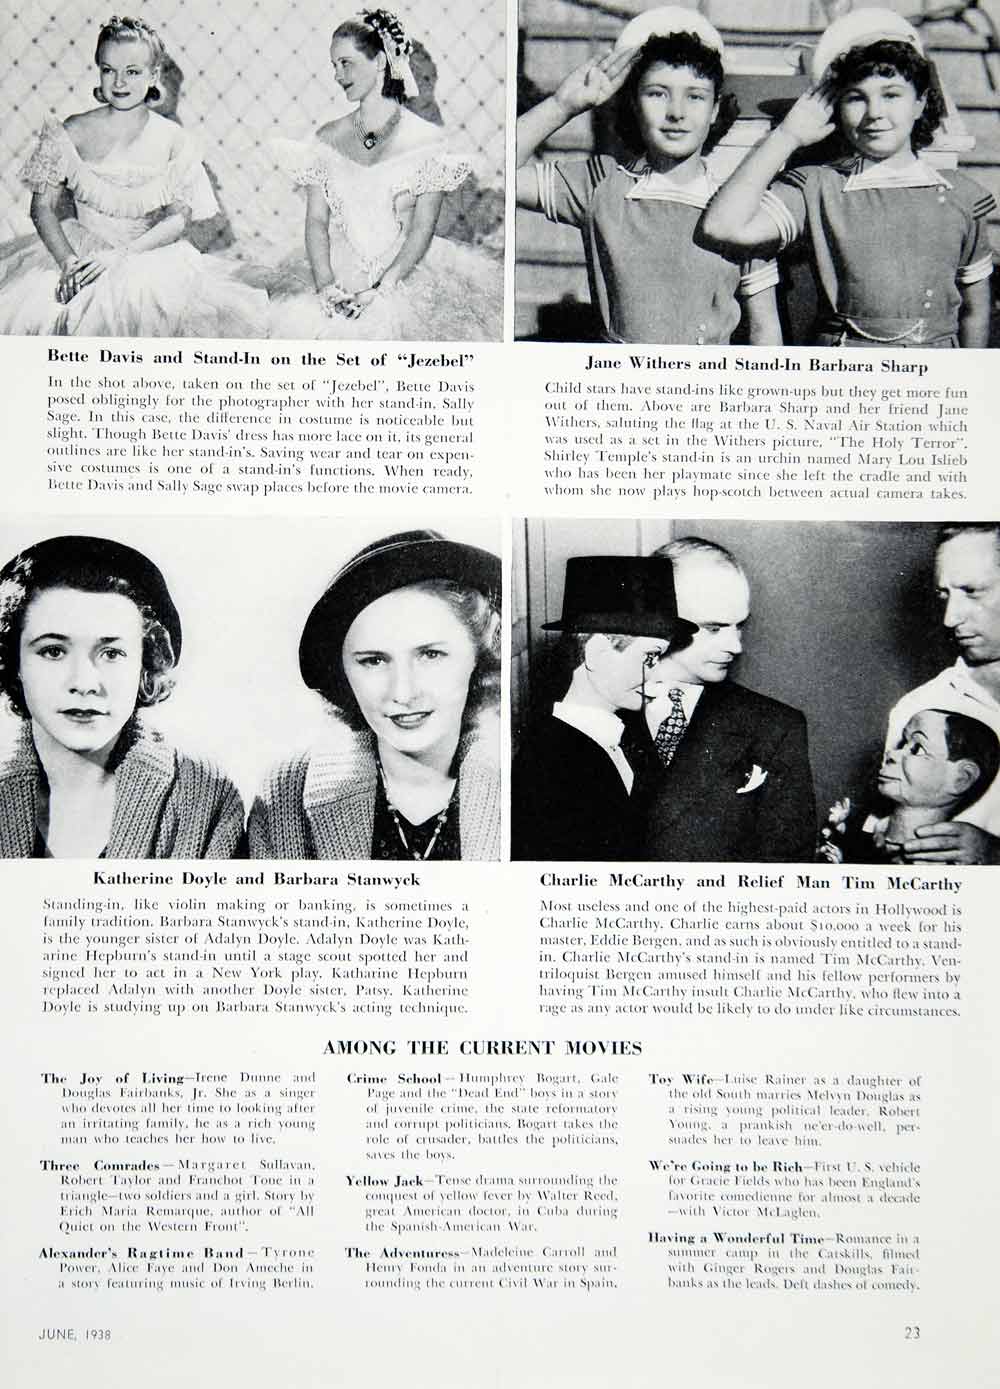 1938 Article Hollywood Movie Doubles Stand-ins Sally Sage Barbara Sharp YWD3